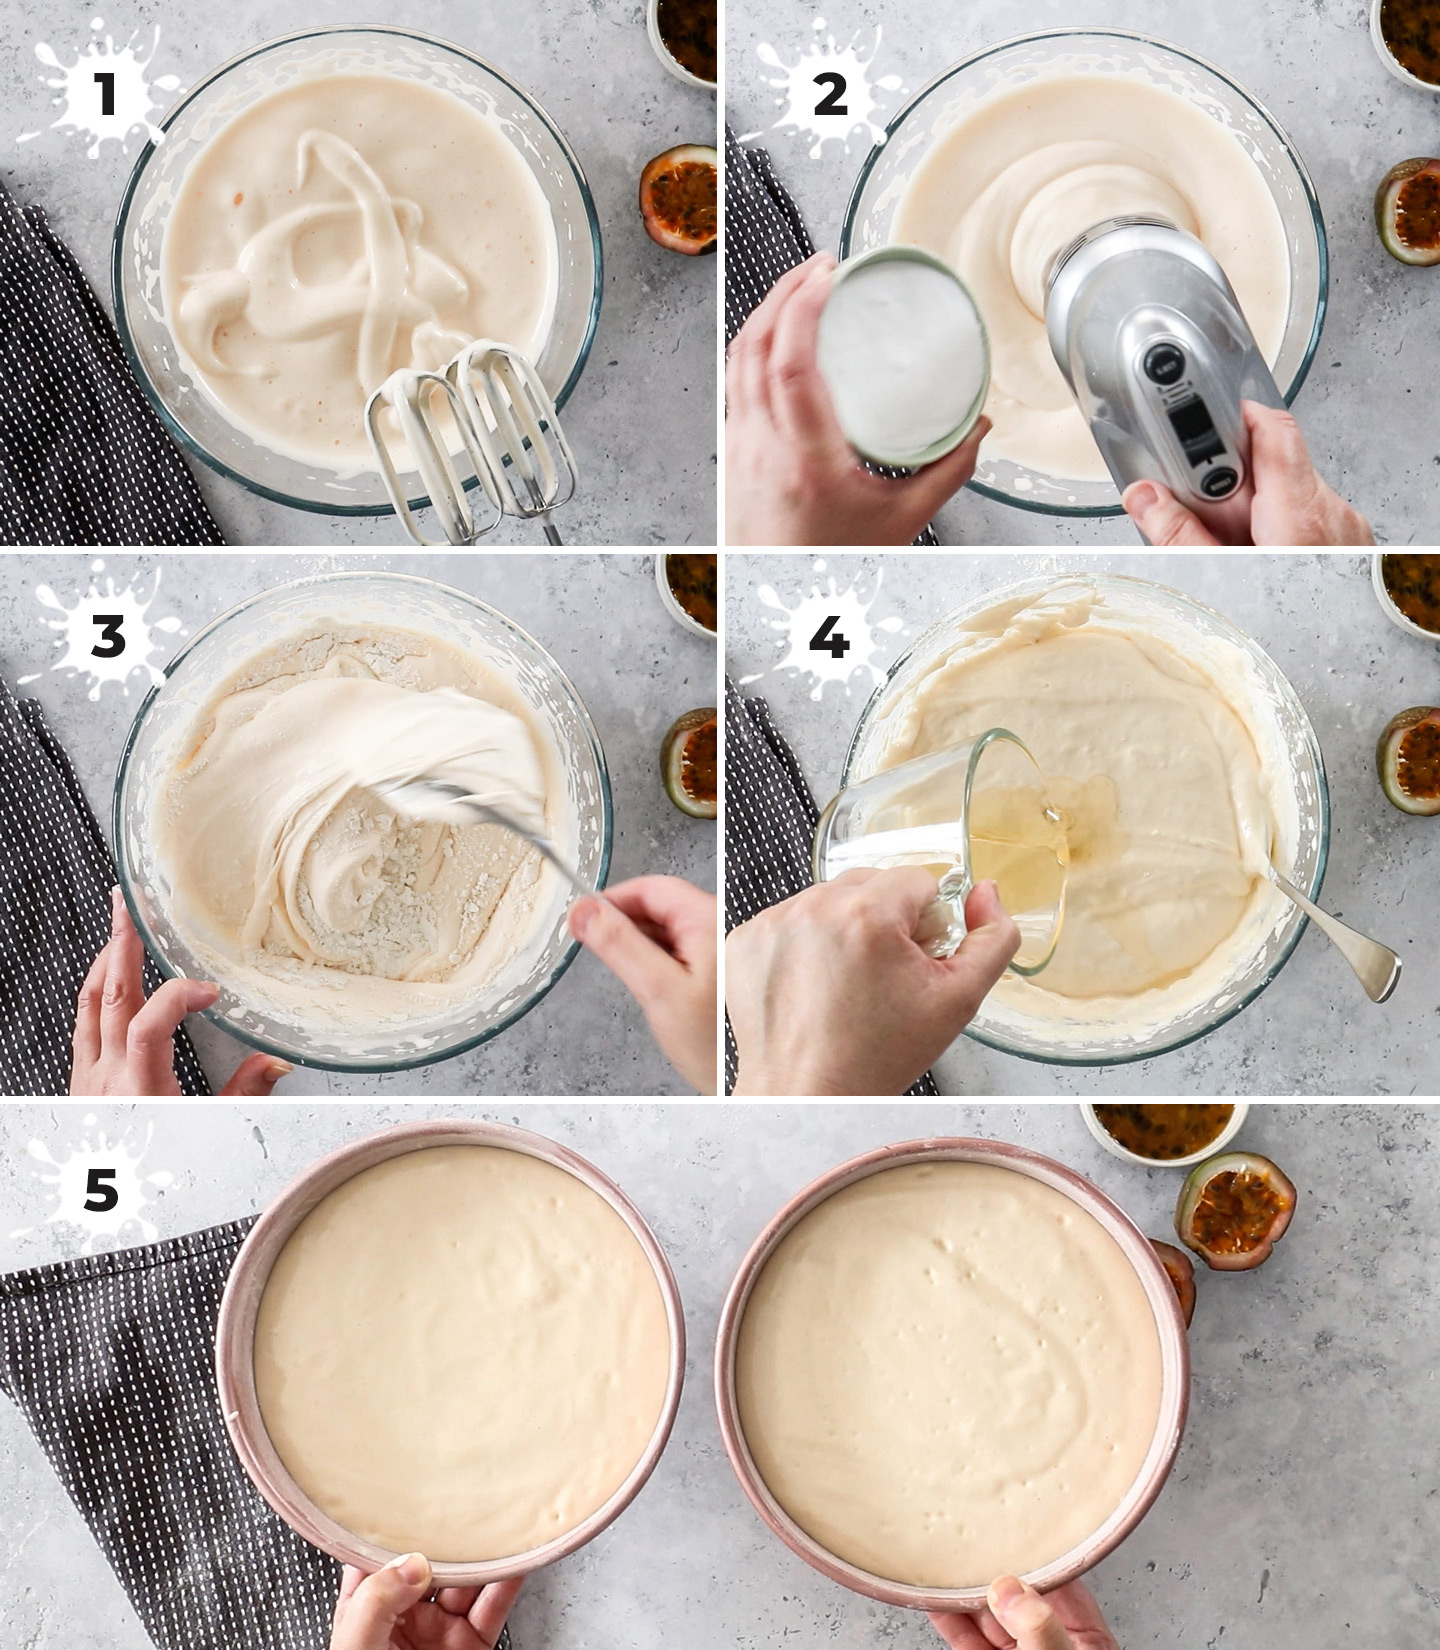 A collage showing how to make the sponge batter.